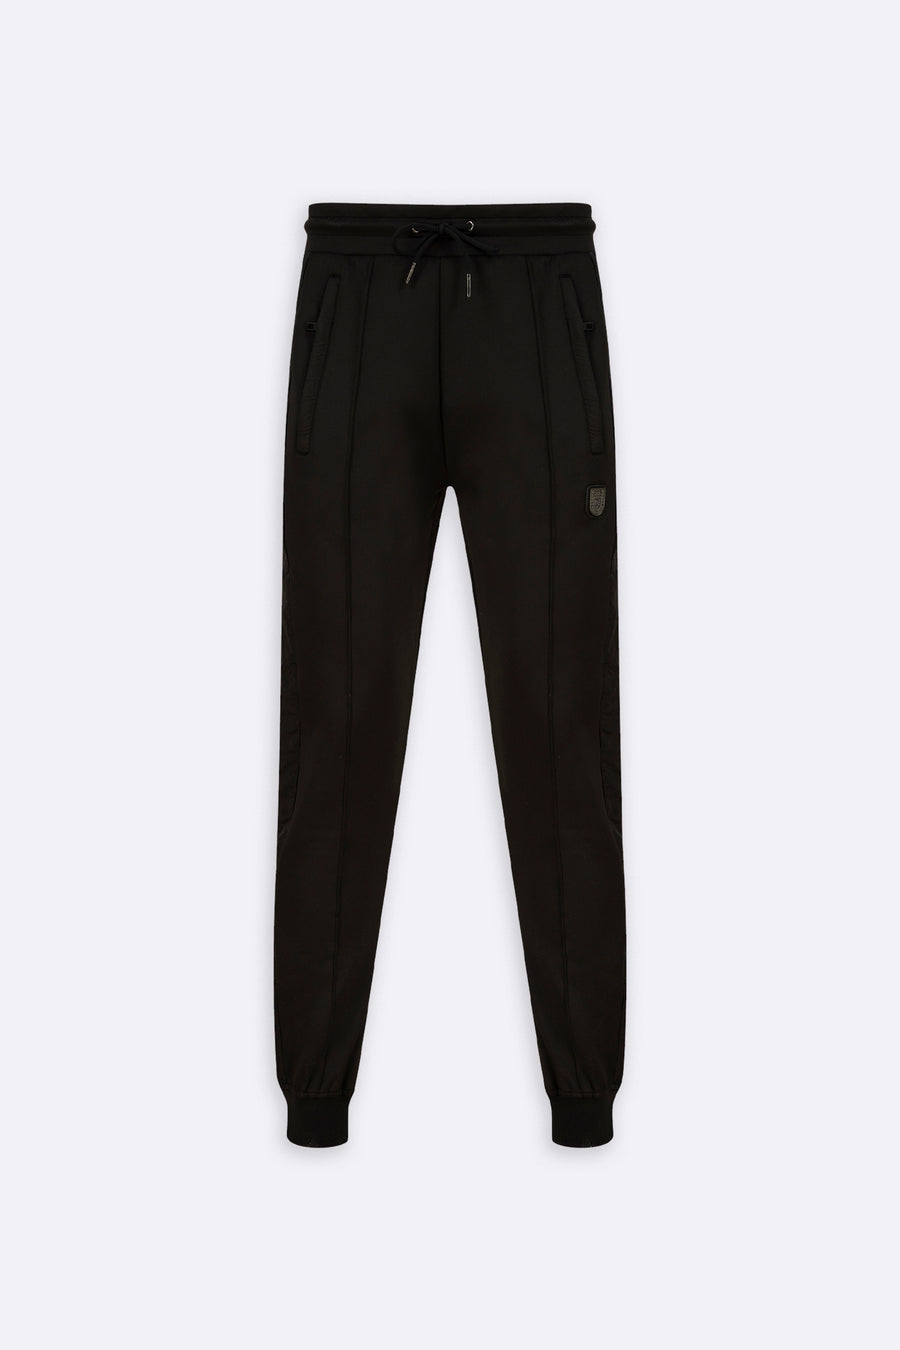 LUXE TRACK PANT (BLACK)